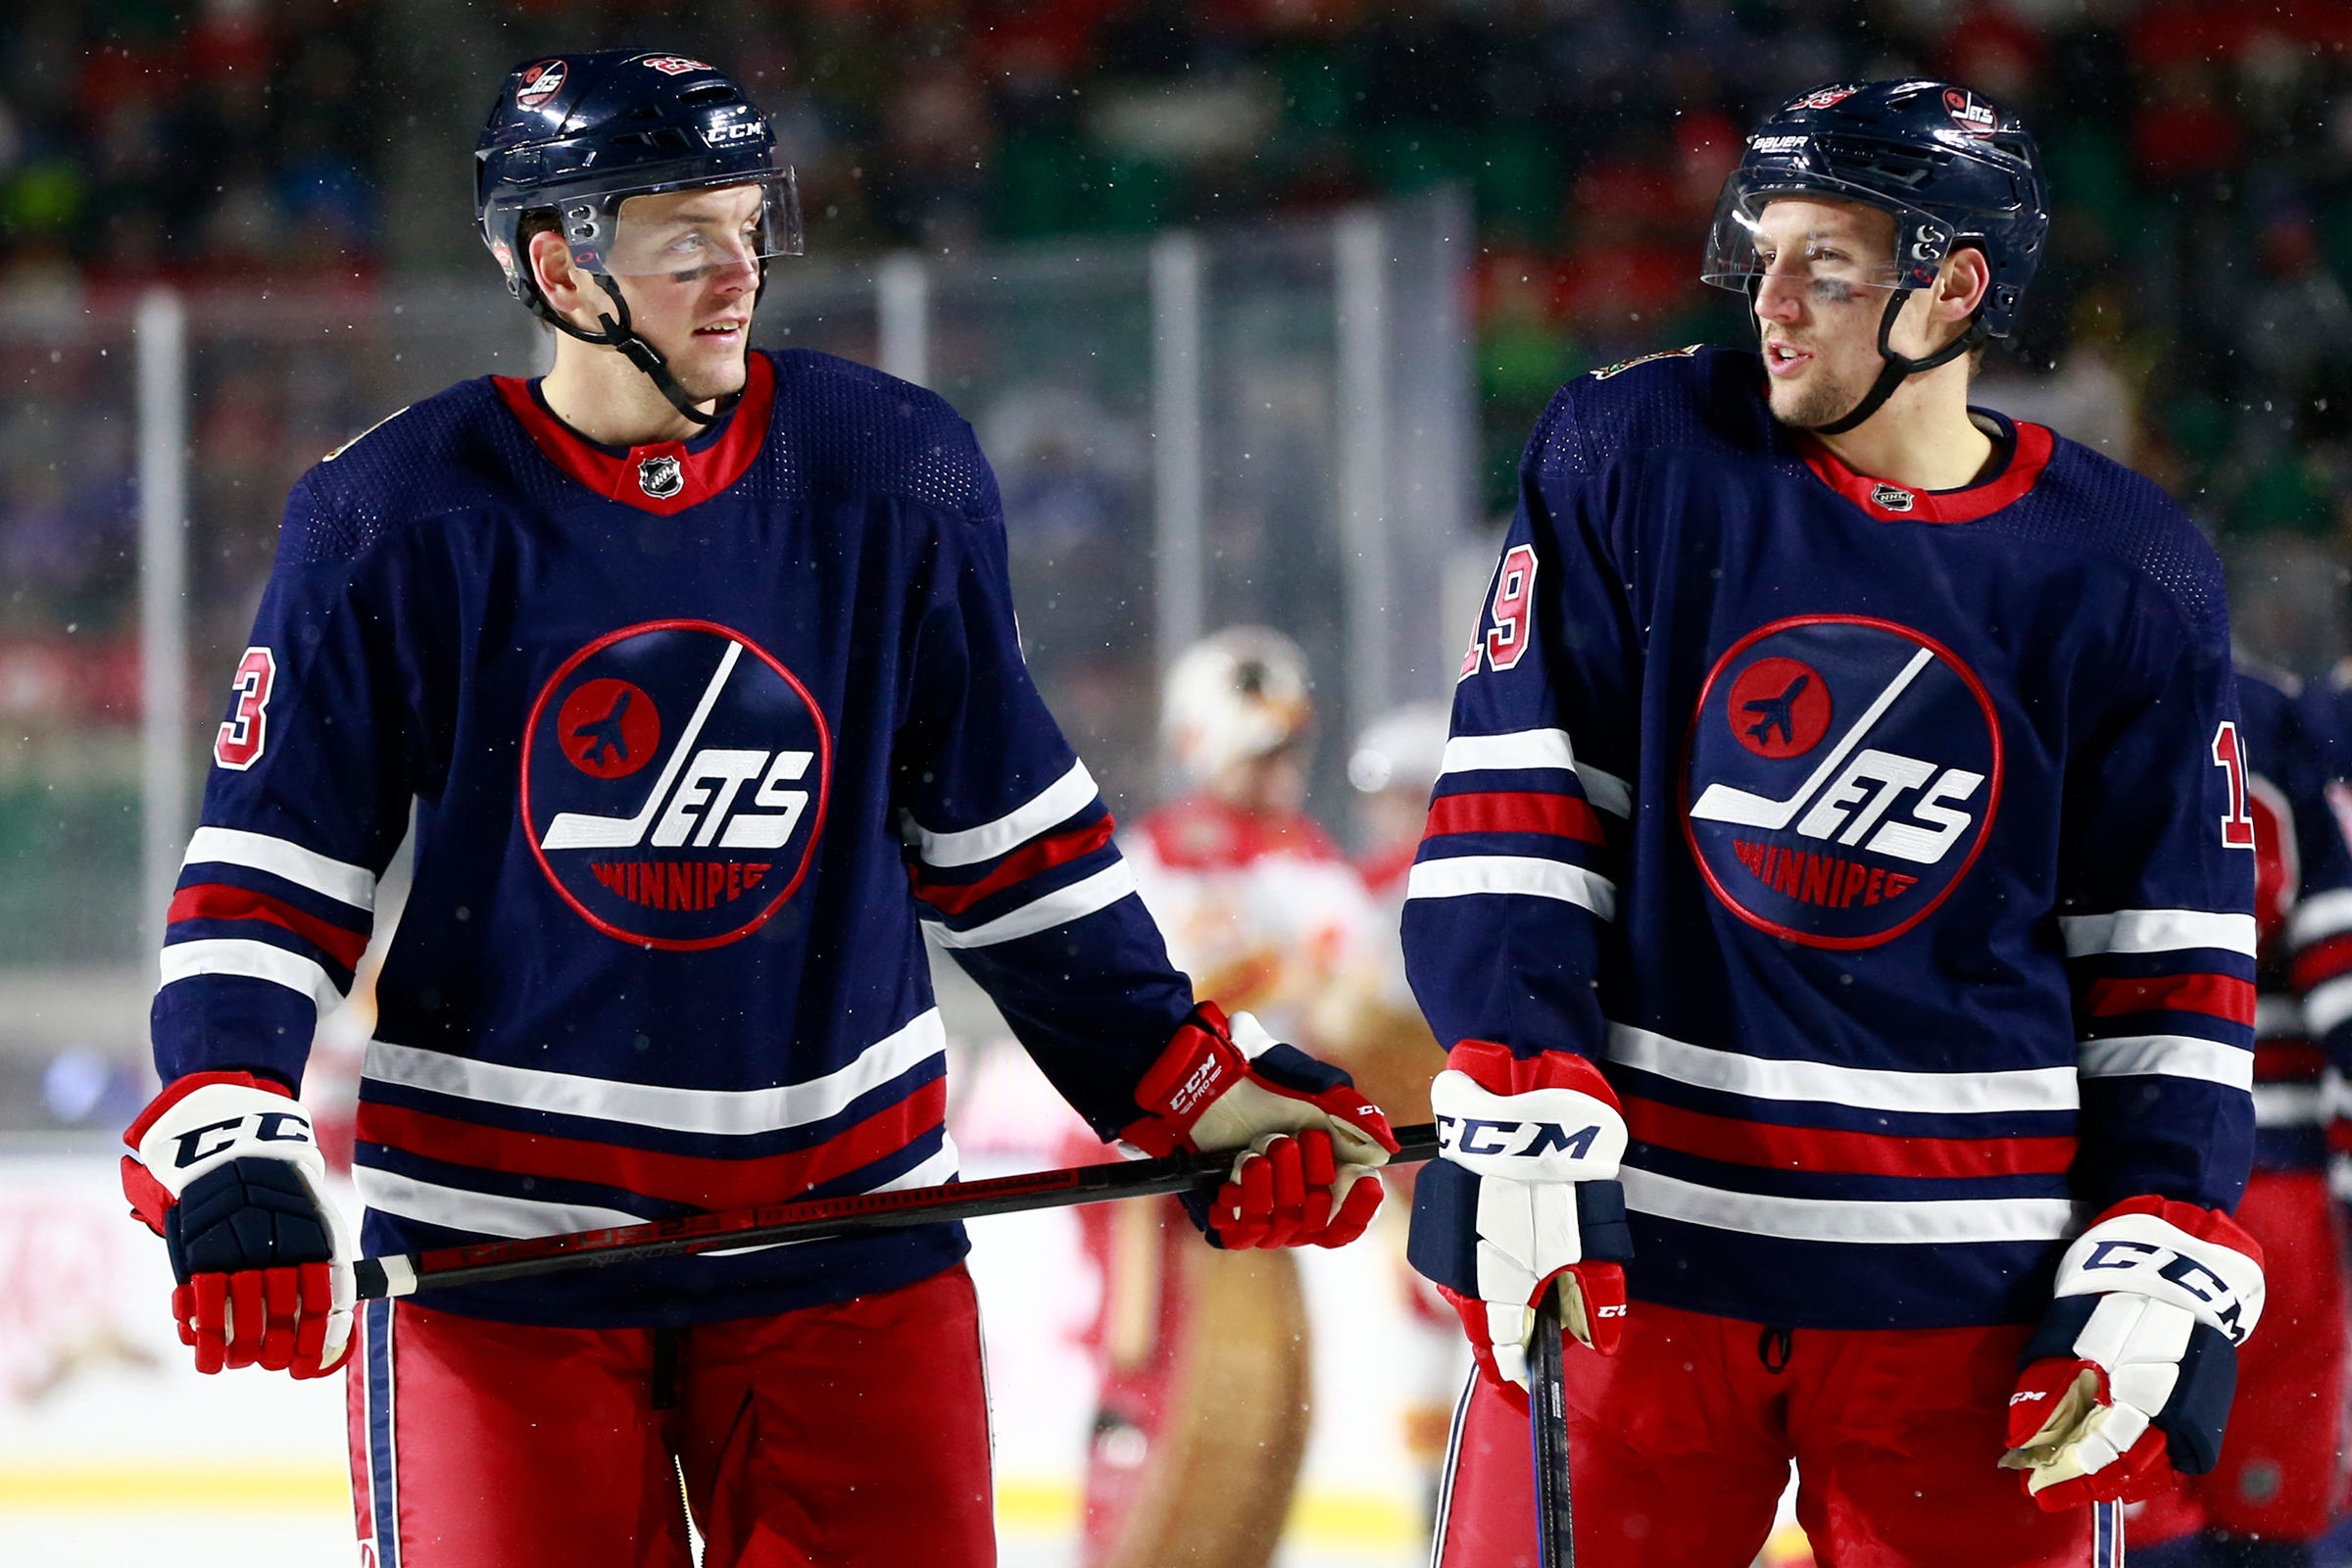 Carl Dahlstrom #23 (L) and David Gustafsson #19 of the Winnipeg Jets stand talk while playing in the 2019 Tim Hortons NHL Heritage Classic against the Calgary Flames at Mosaic Stadium on October 26, 2019 in Regina, Canada